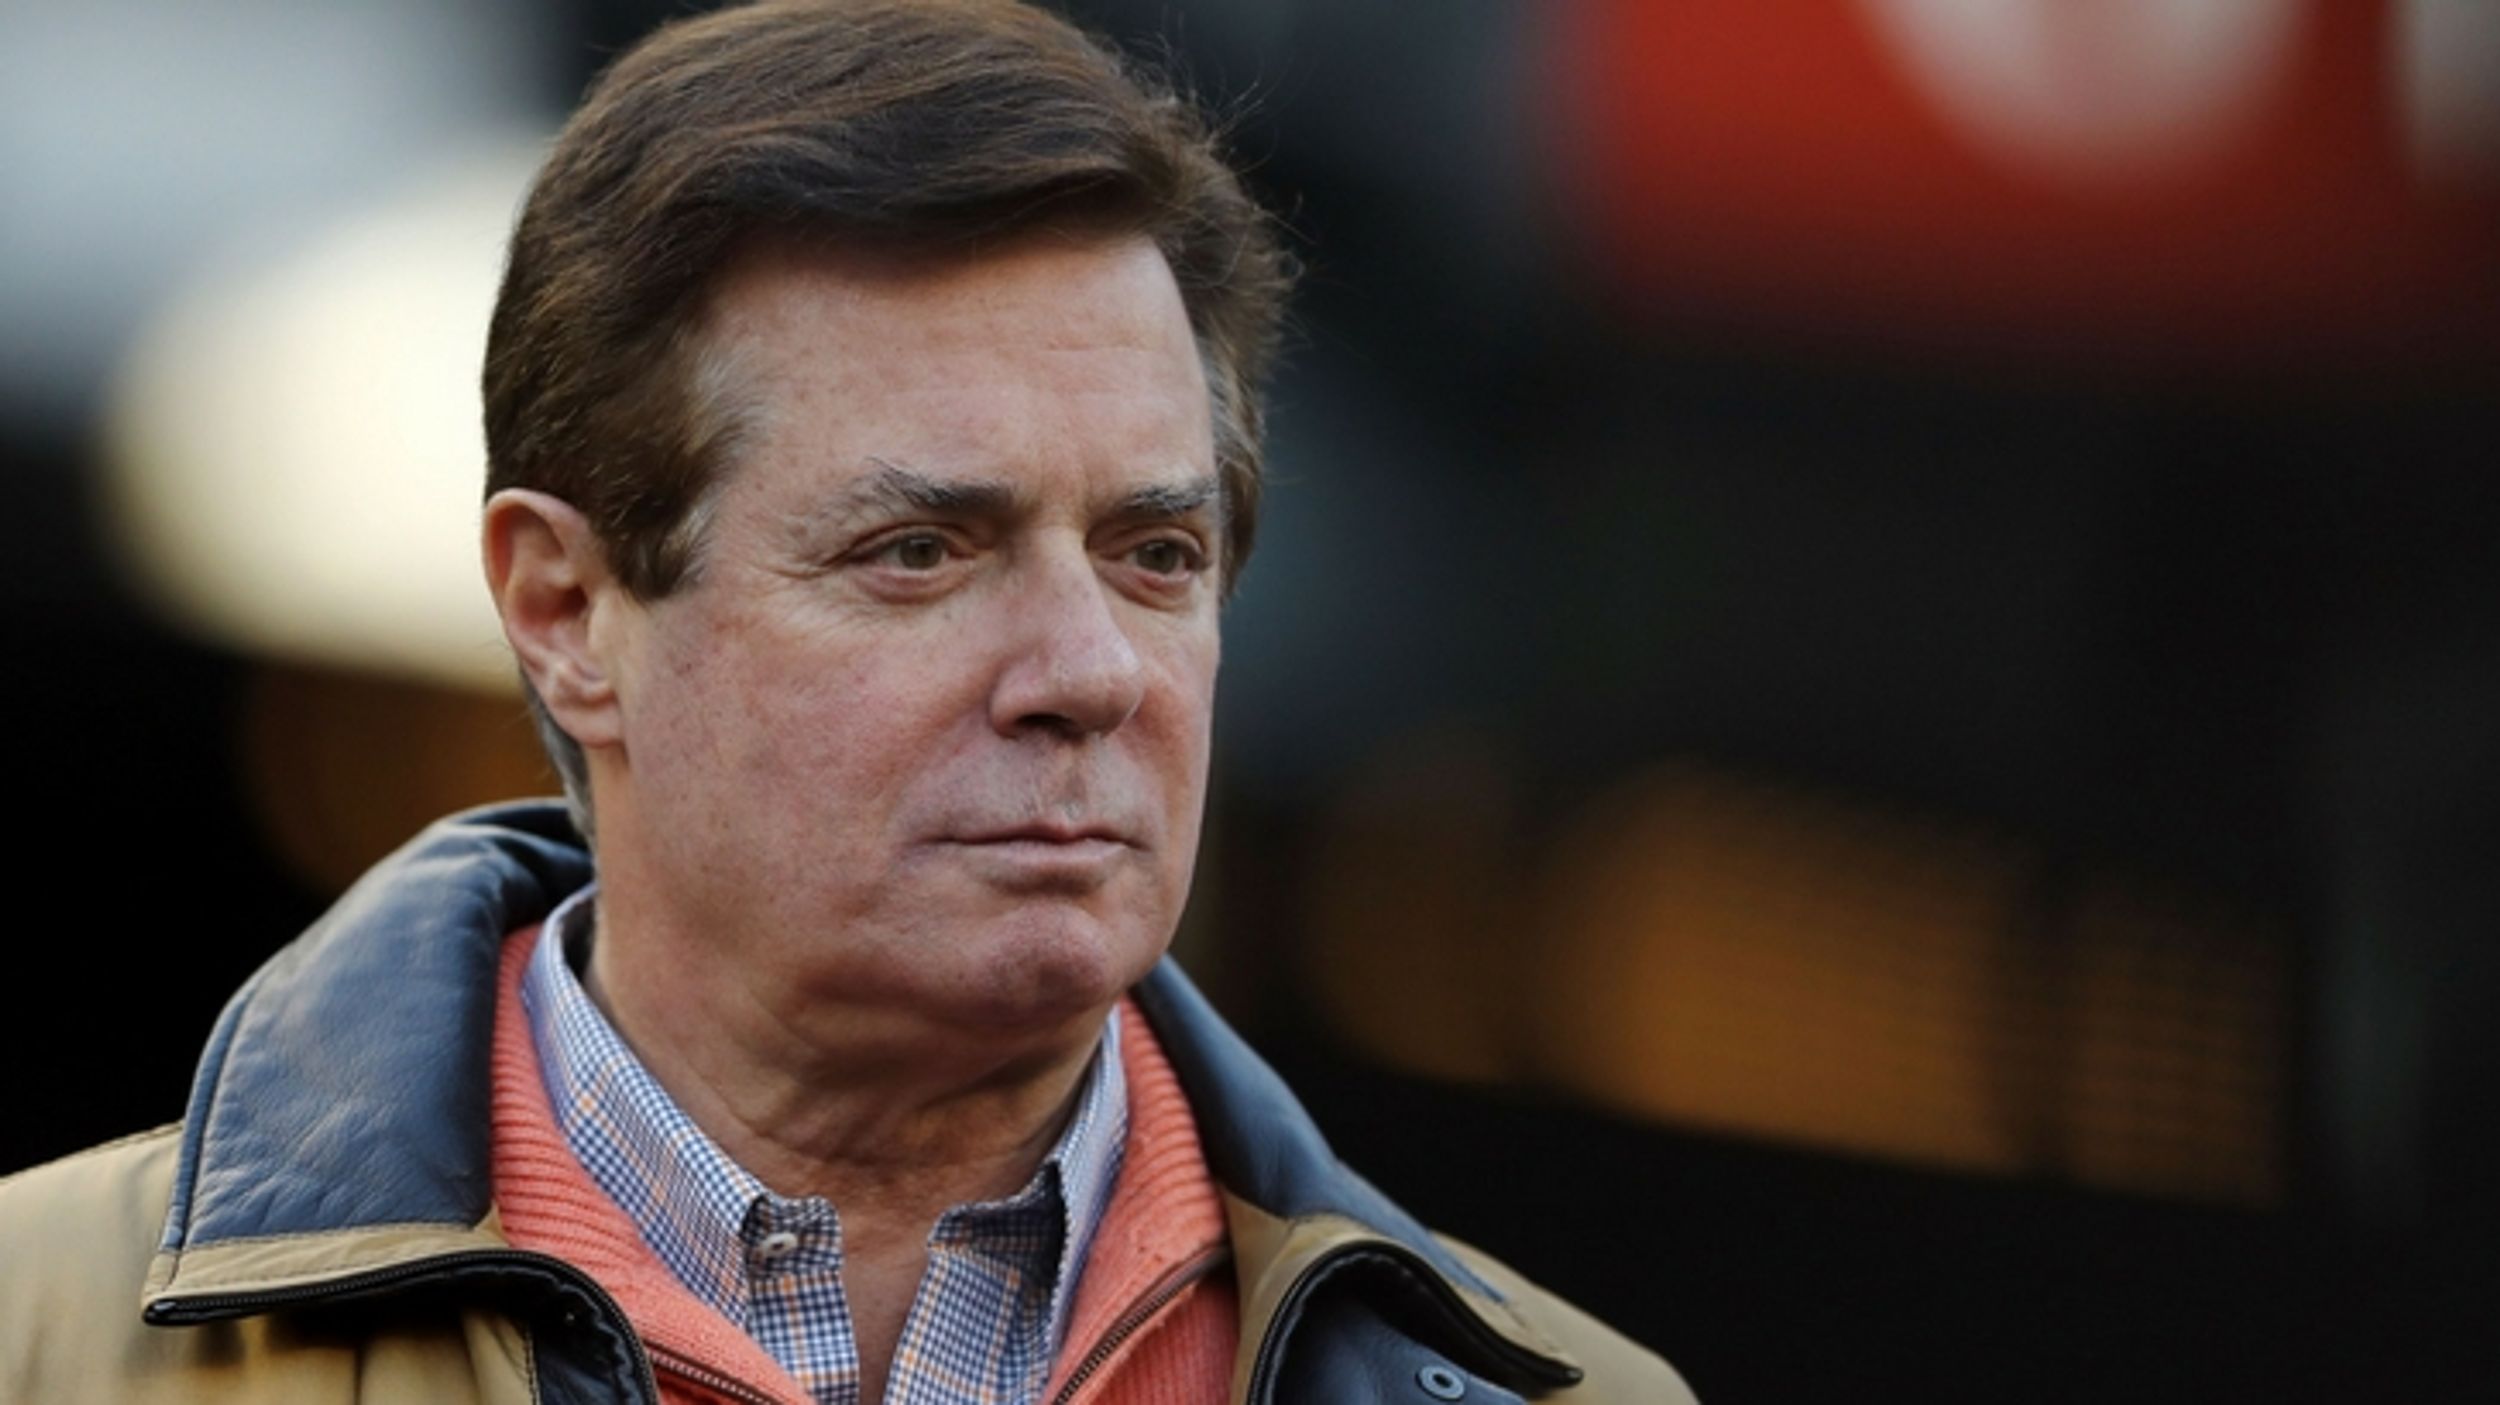 REPORT: Paul Manafort Makes Offer to get out of House Arrest